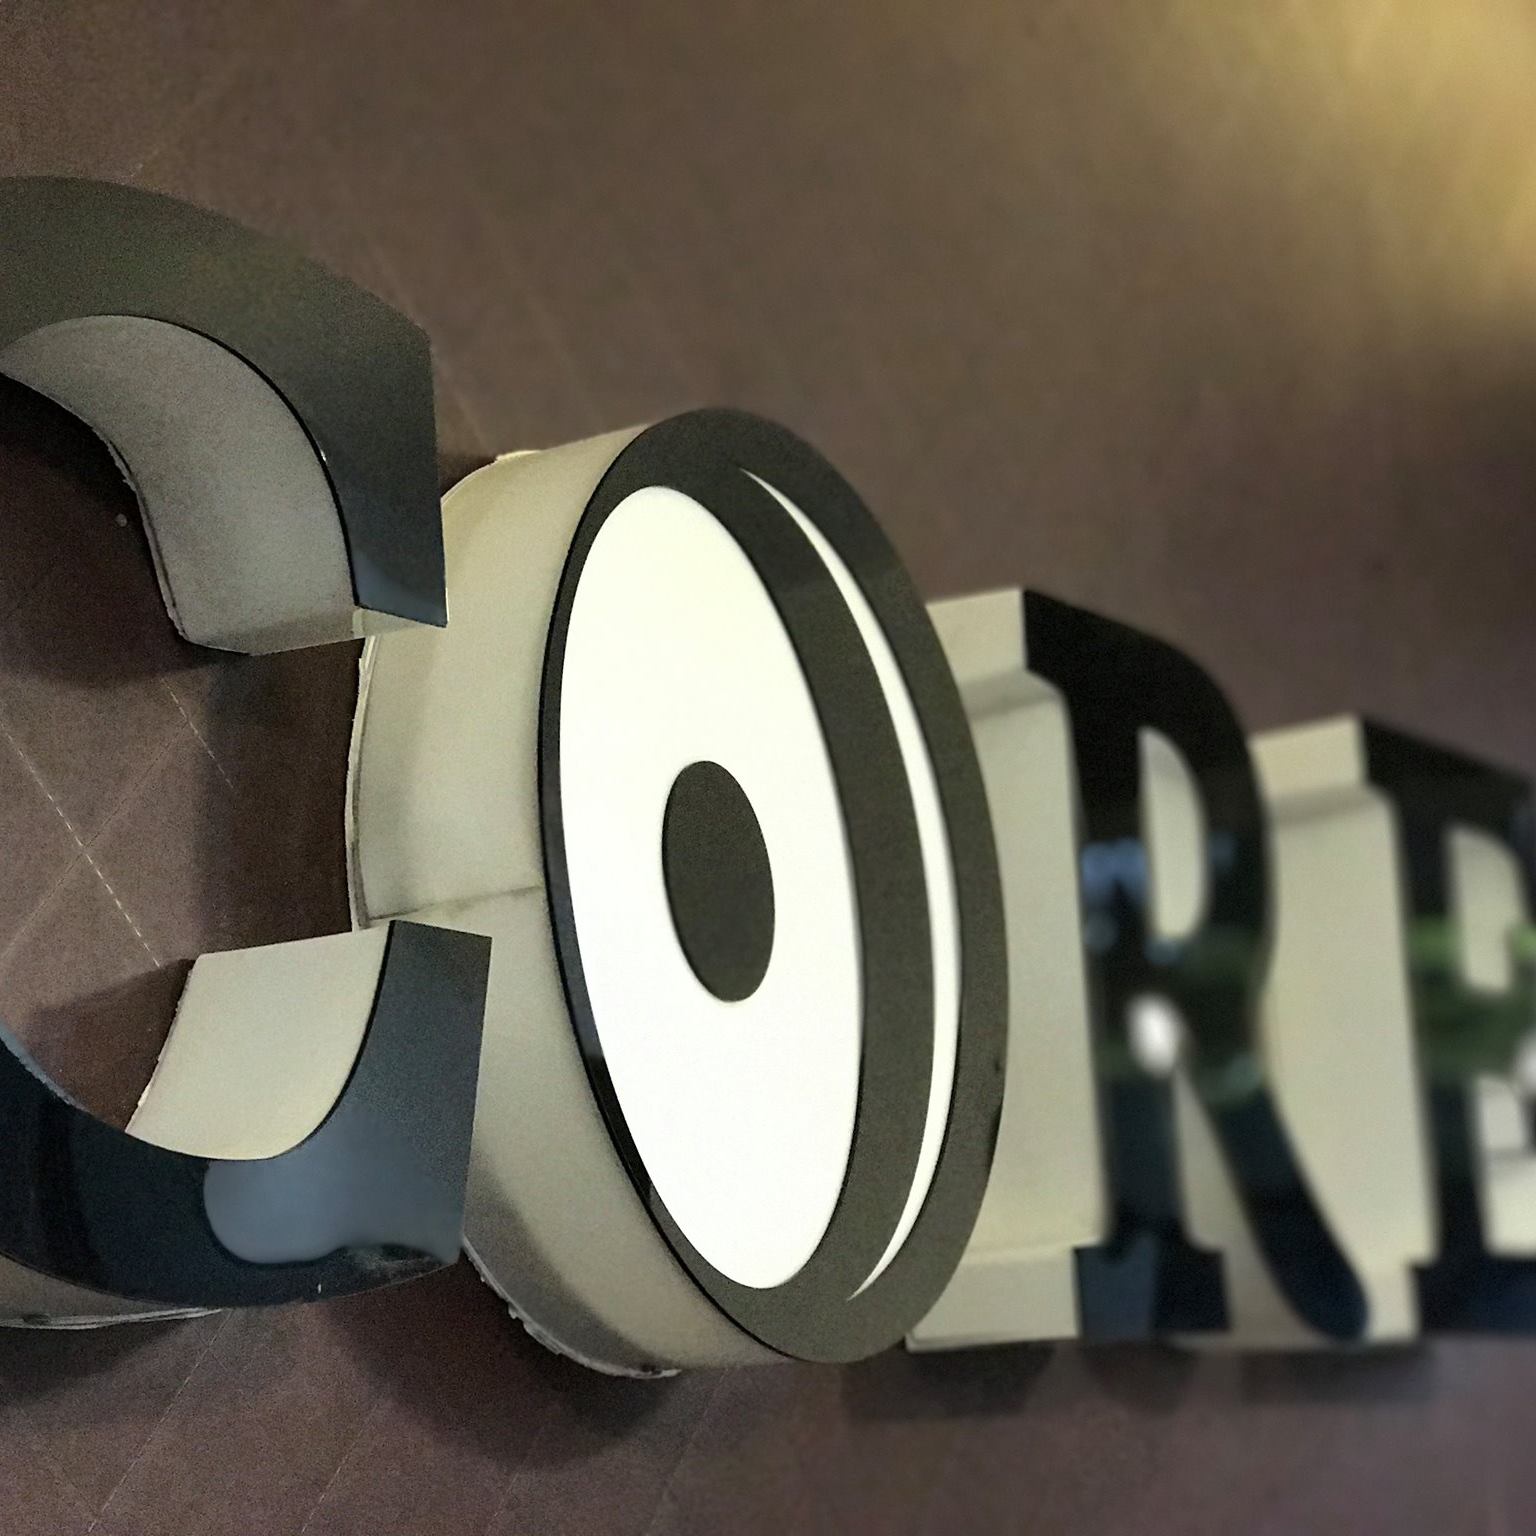 CORE GYM AND FITNESS CENTER - Logo